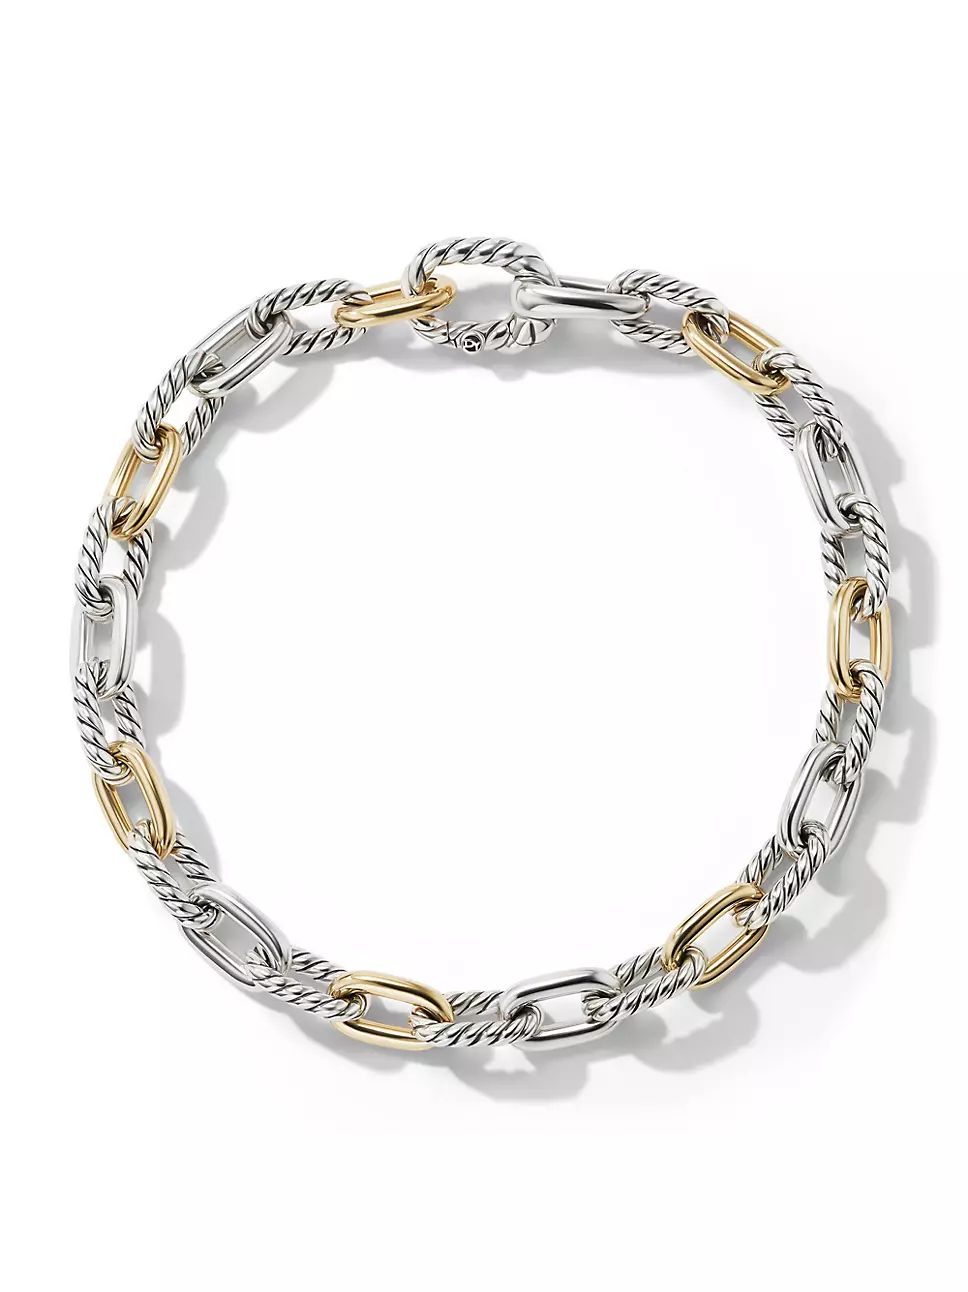 DY Madison Chain Bracelet in Sterling Silver | Saks Fifth Avenue